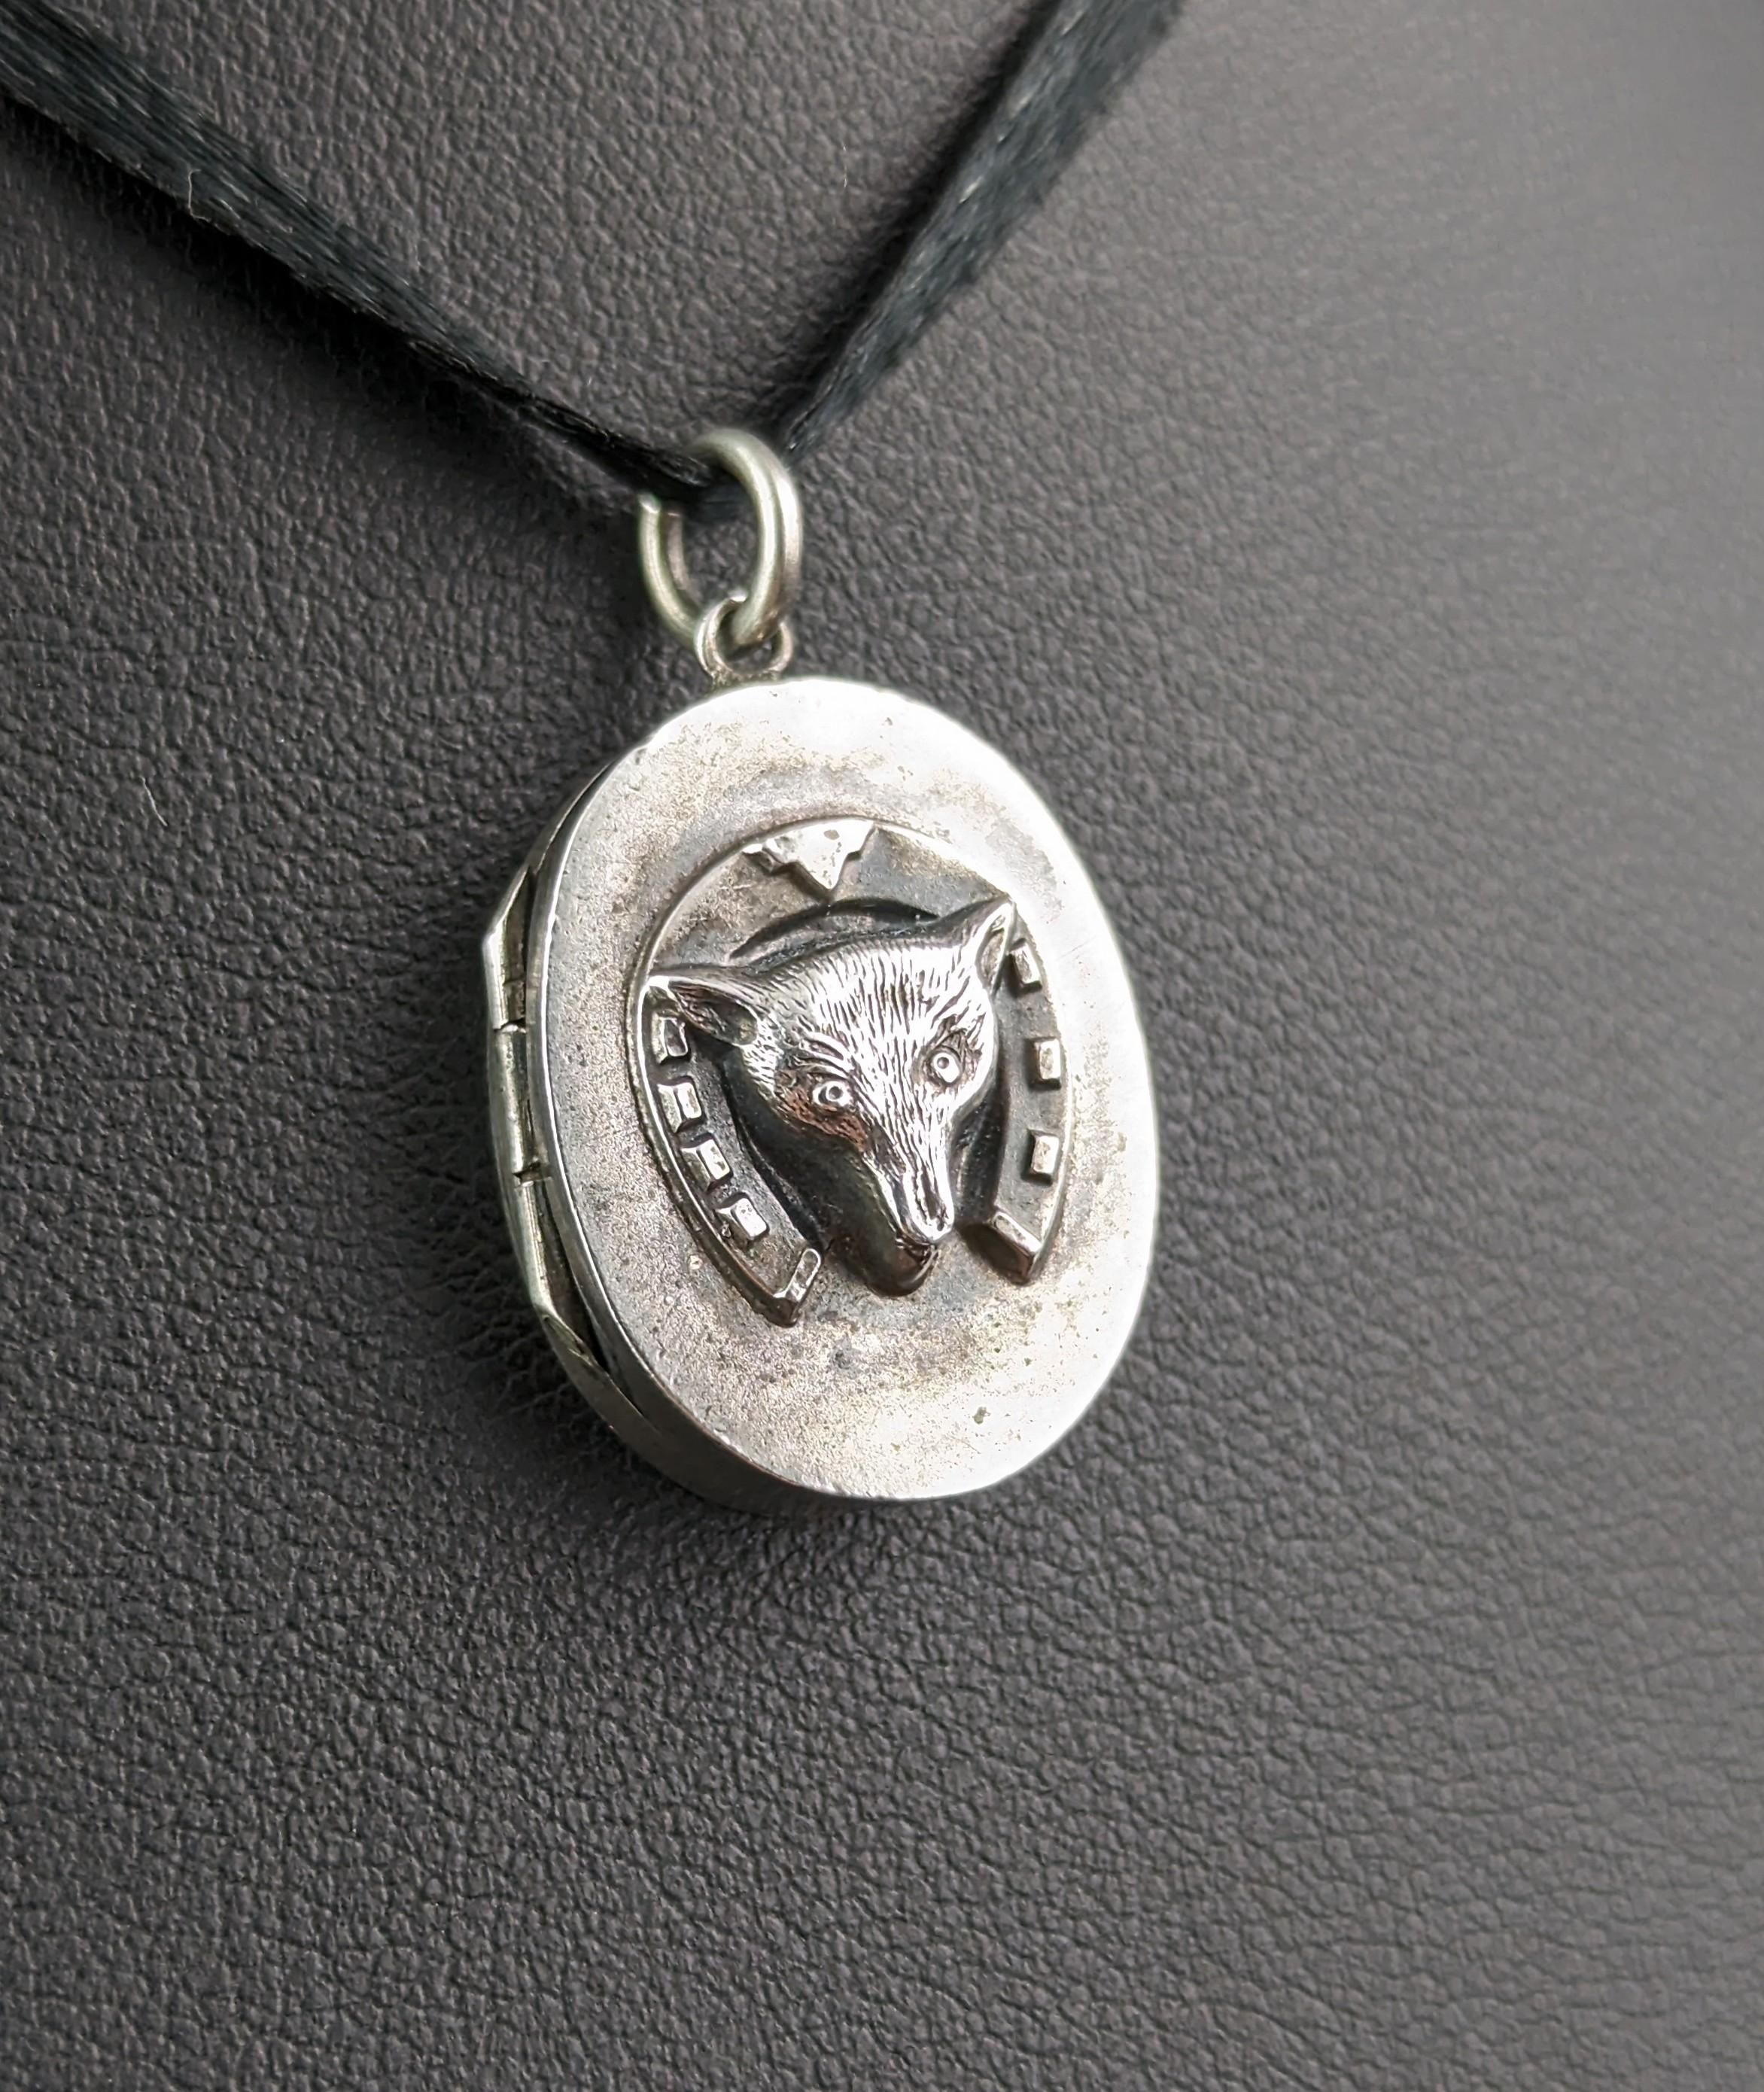 A fantastic antique Victorian era sterling silver fox and horseshoe locket.

I love finding original antique fox pieces and I know you do too! They are always so very popular and this little chap is just adorable.

It is a very small sized locket